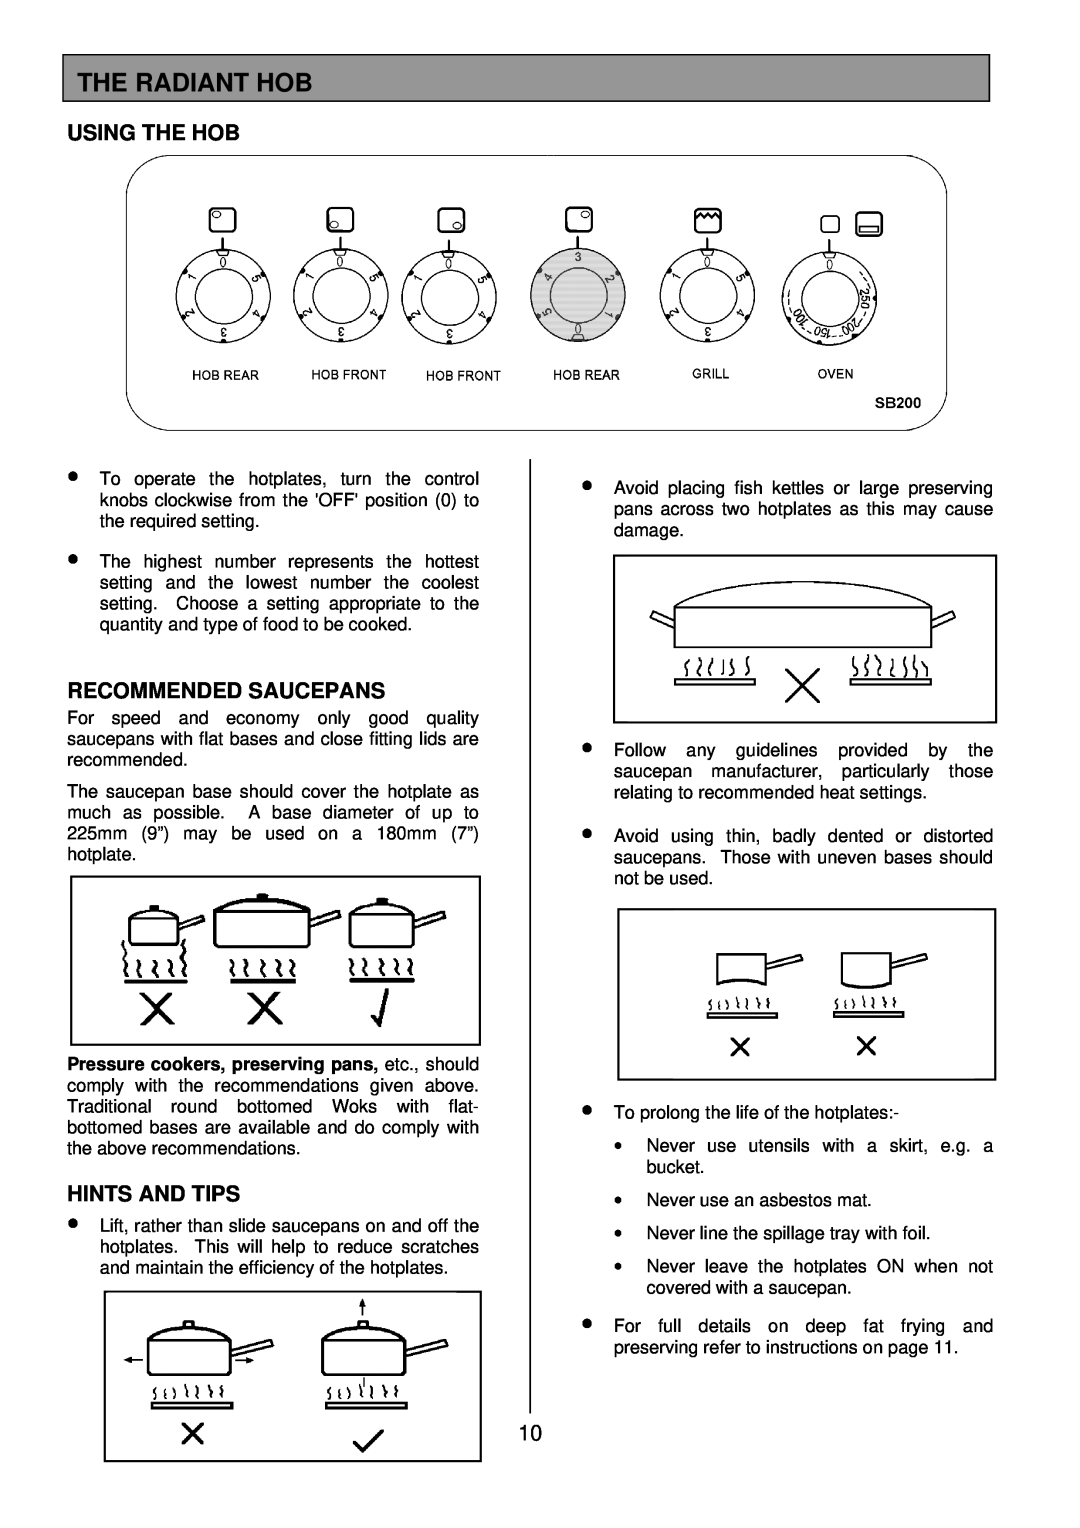 Tricity Bendix SB200 installation instructions The Radiant Hob, Using The Hob, Recommended Saucepans, Hints And Tips 